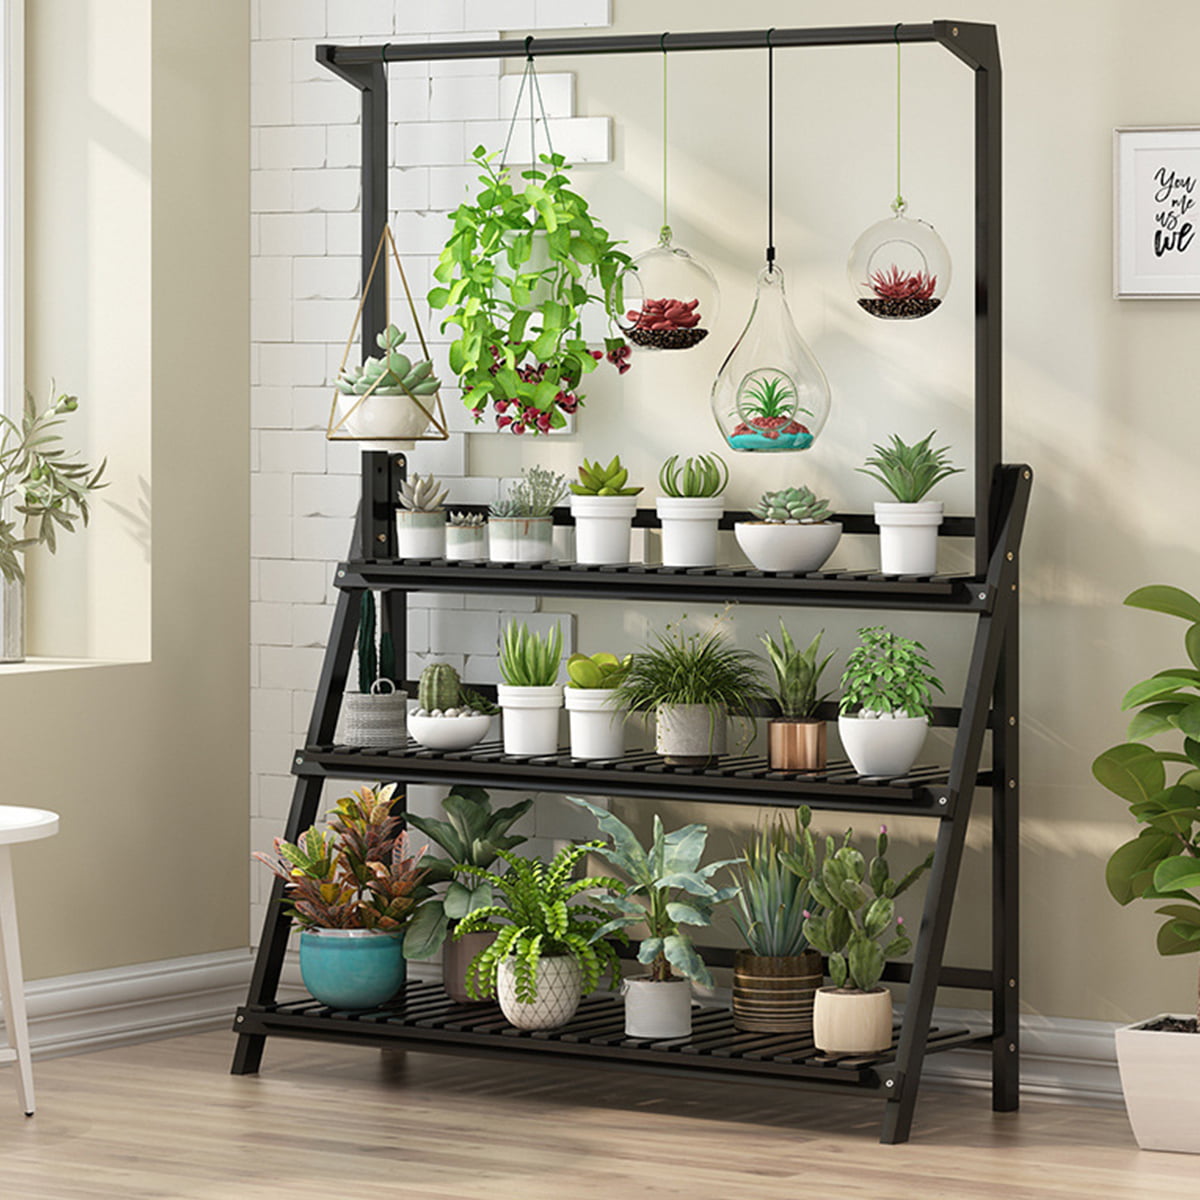 IDWO Plant Stand Plant Stand Flower Rack Metal Multi-Layer Floor-Standing Flower Ladder Display Shelf Indoor Storage Rack Color : Black, Size : 3 Tiers 2 Colors 